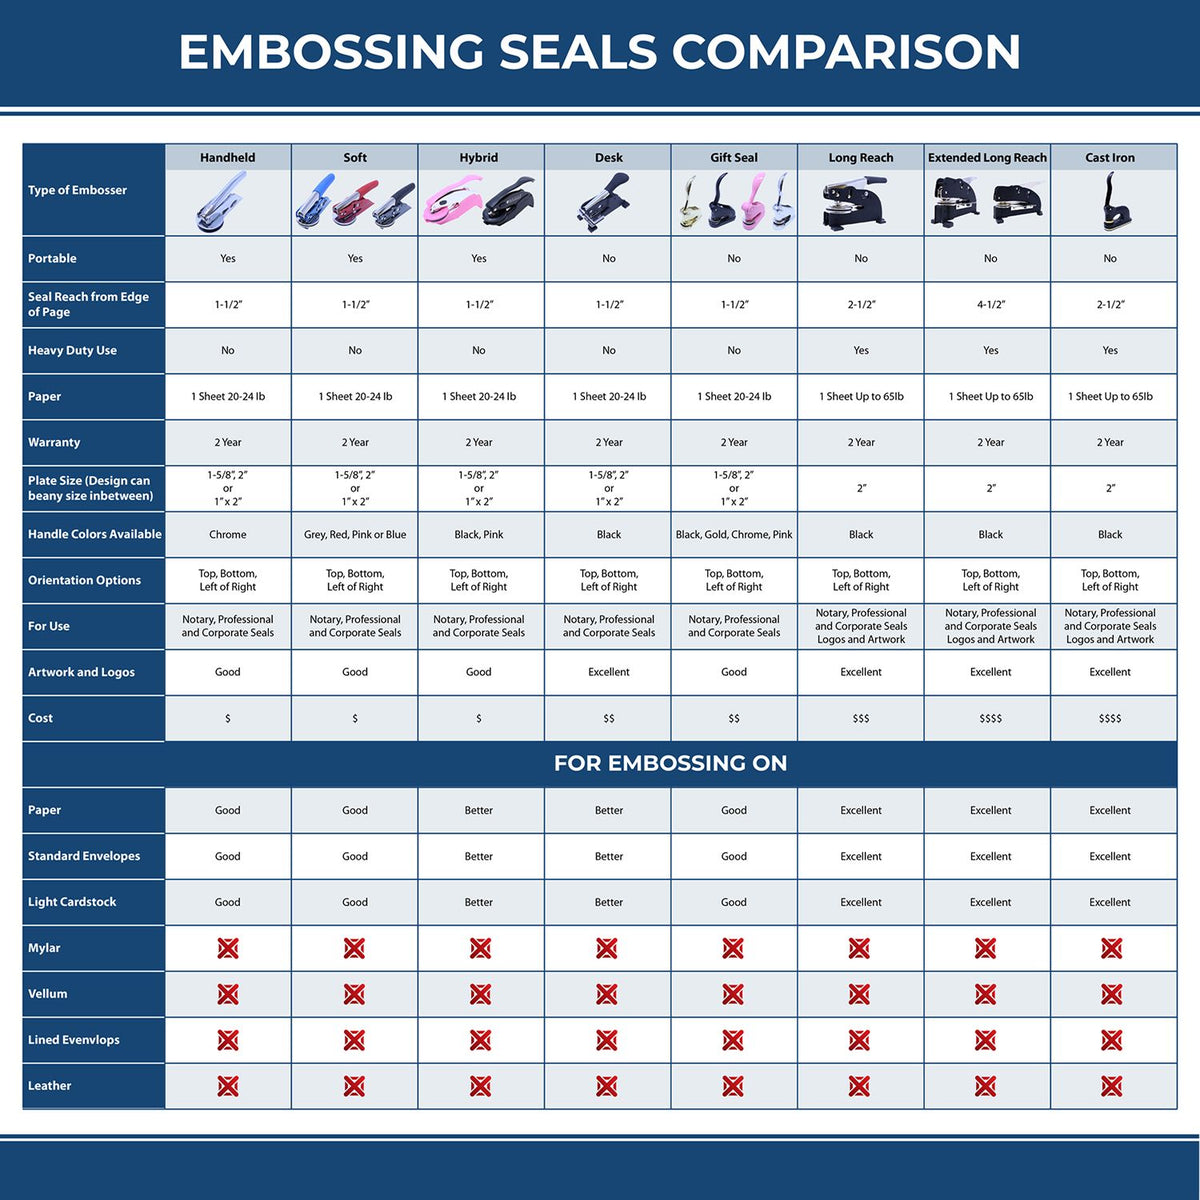 A comparison chart for the different types of mount models available for the Soft Pocket Indiana Landscape Architect Embosser.